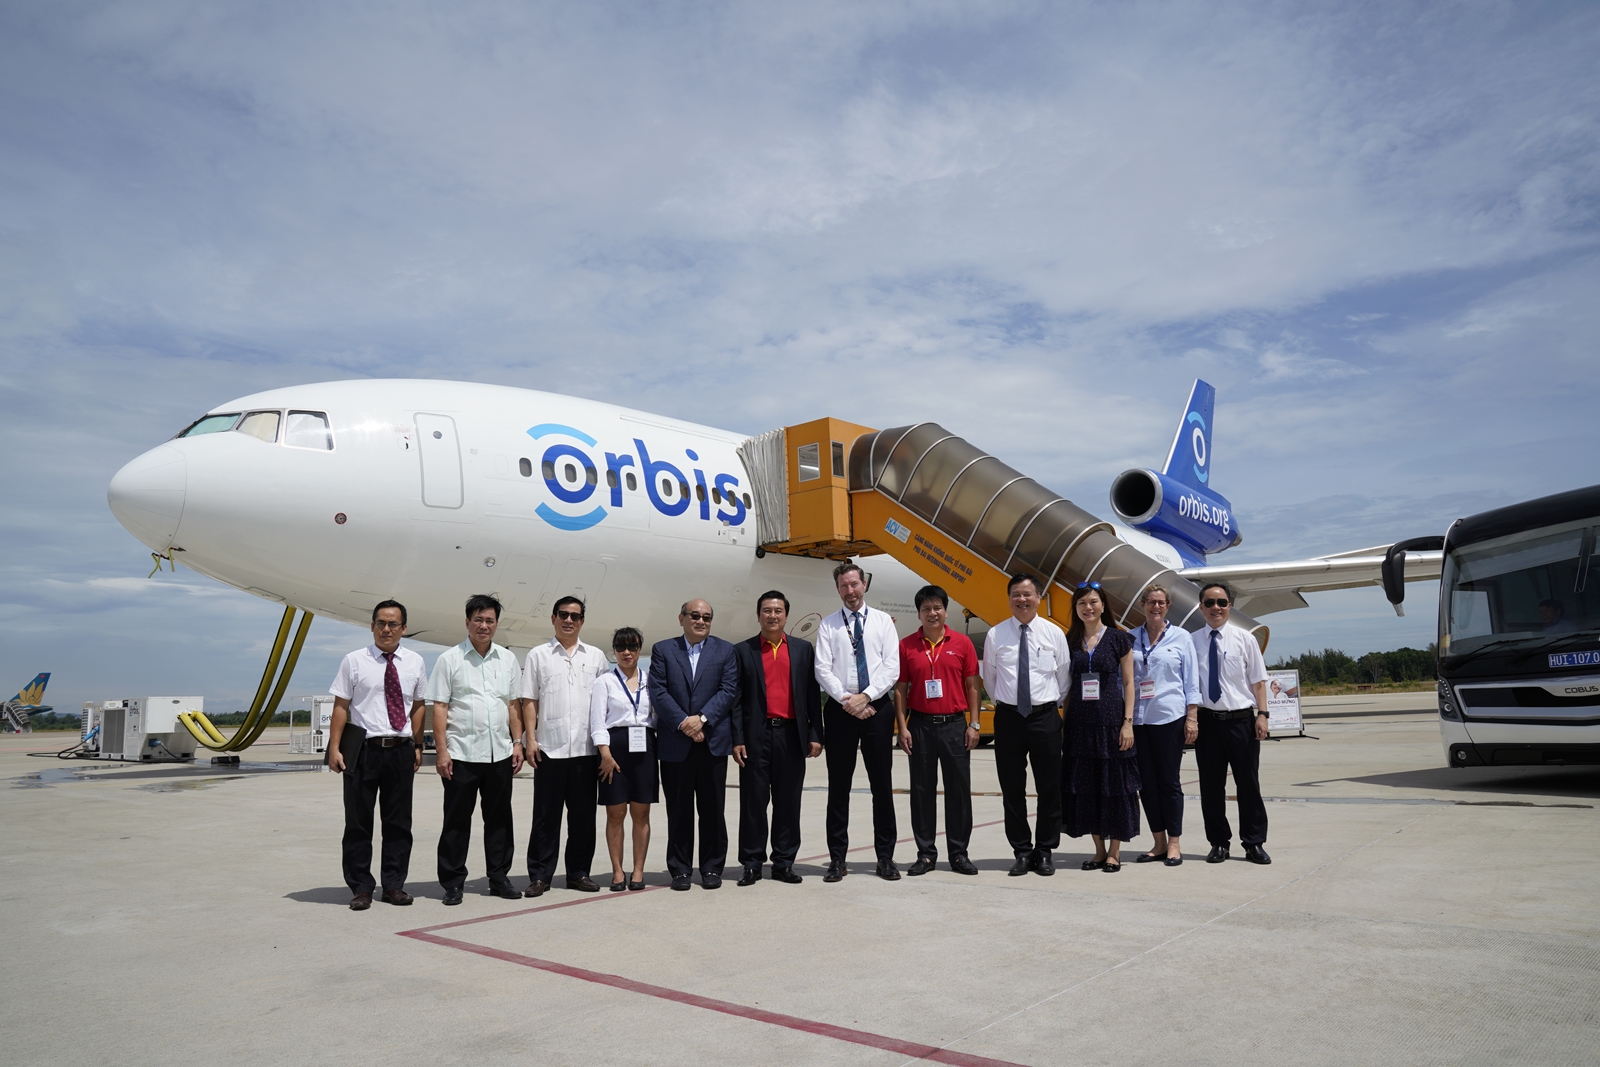 Vietjet signs MoU with Orbis to save light for Vietnamese